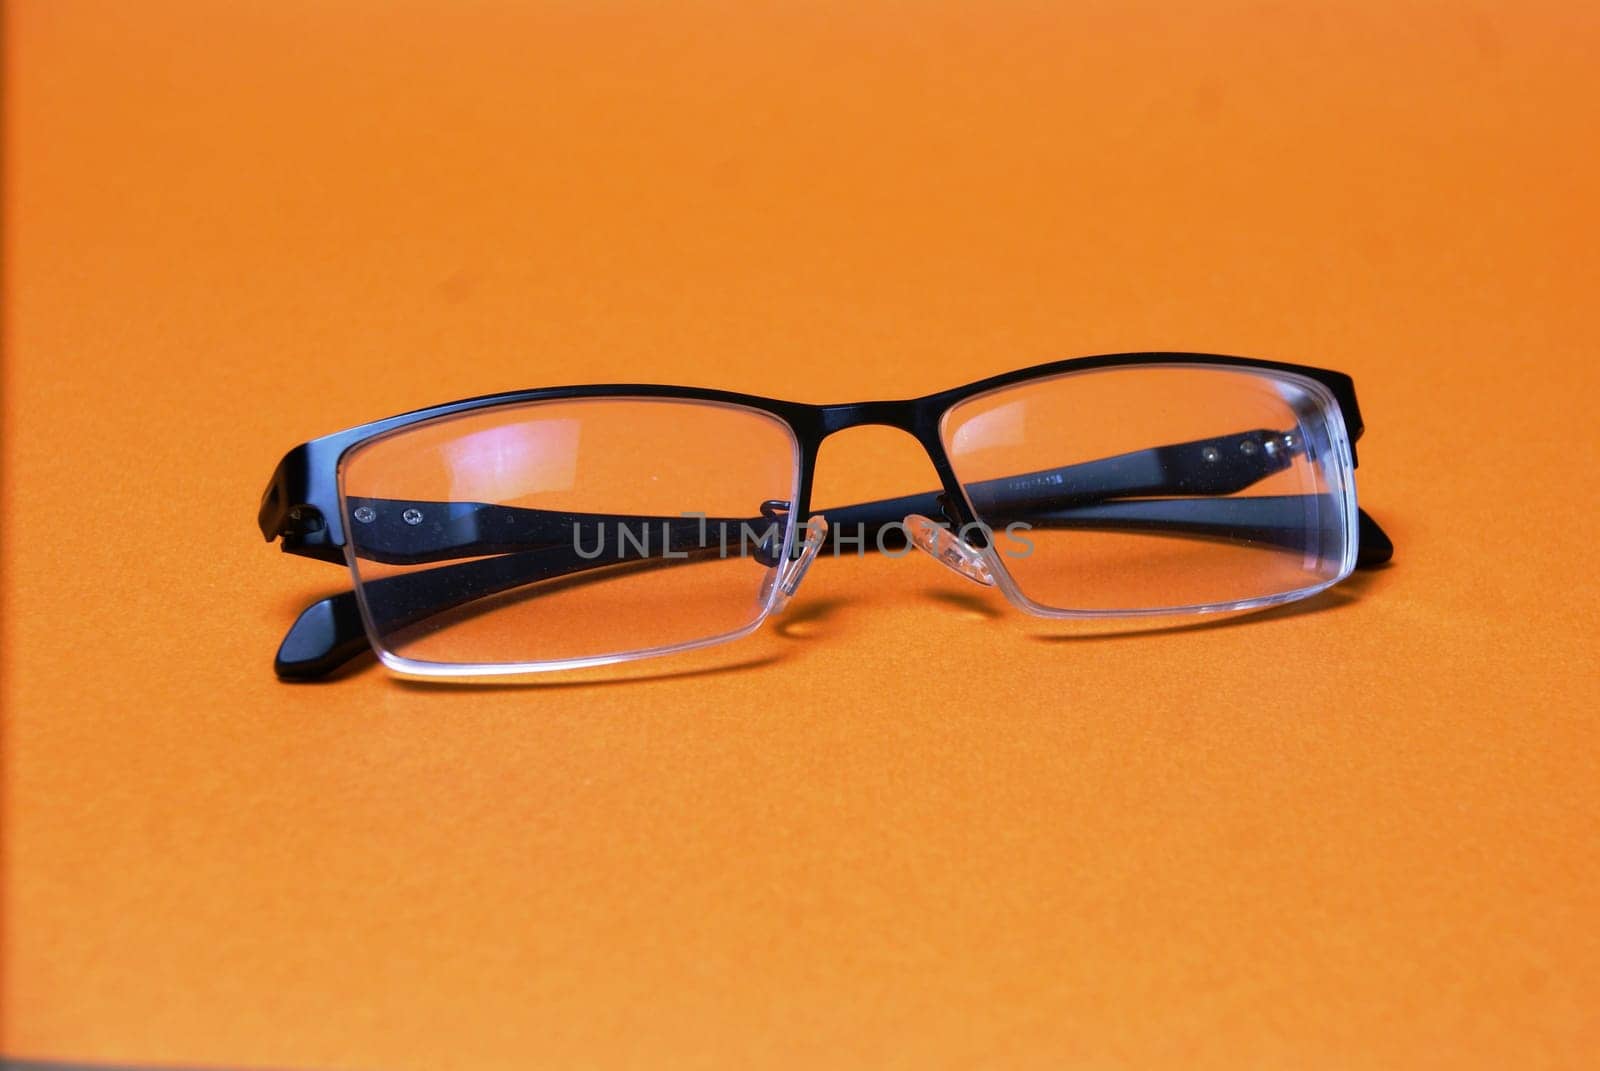 The glasses are on a bright orange background close-up